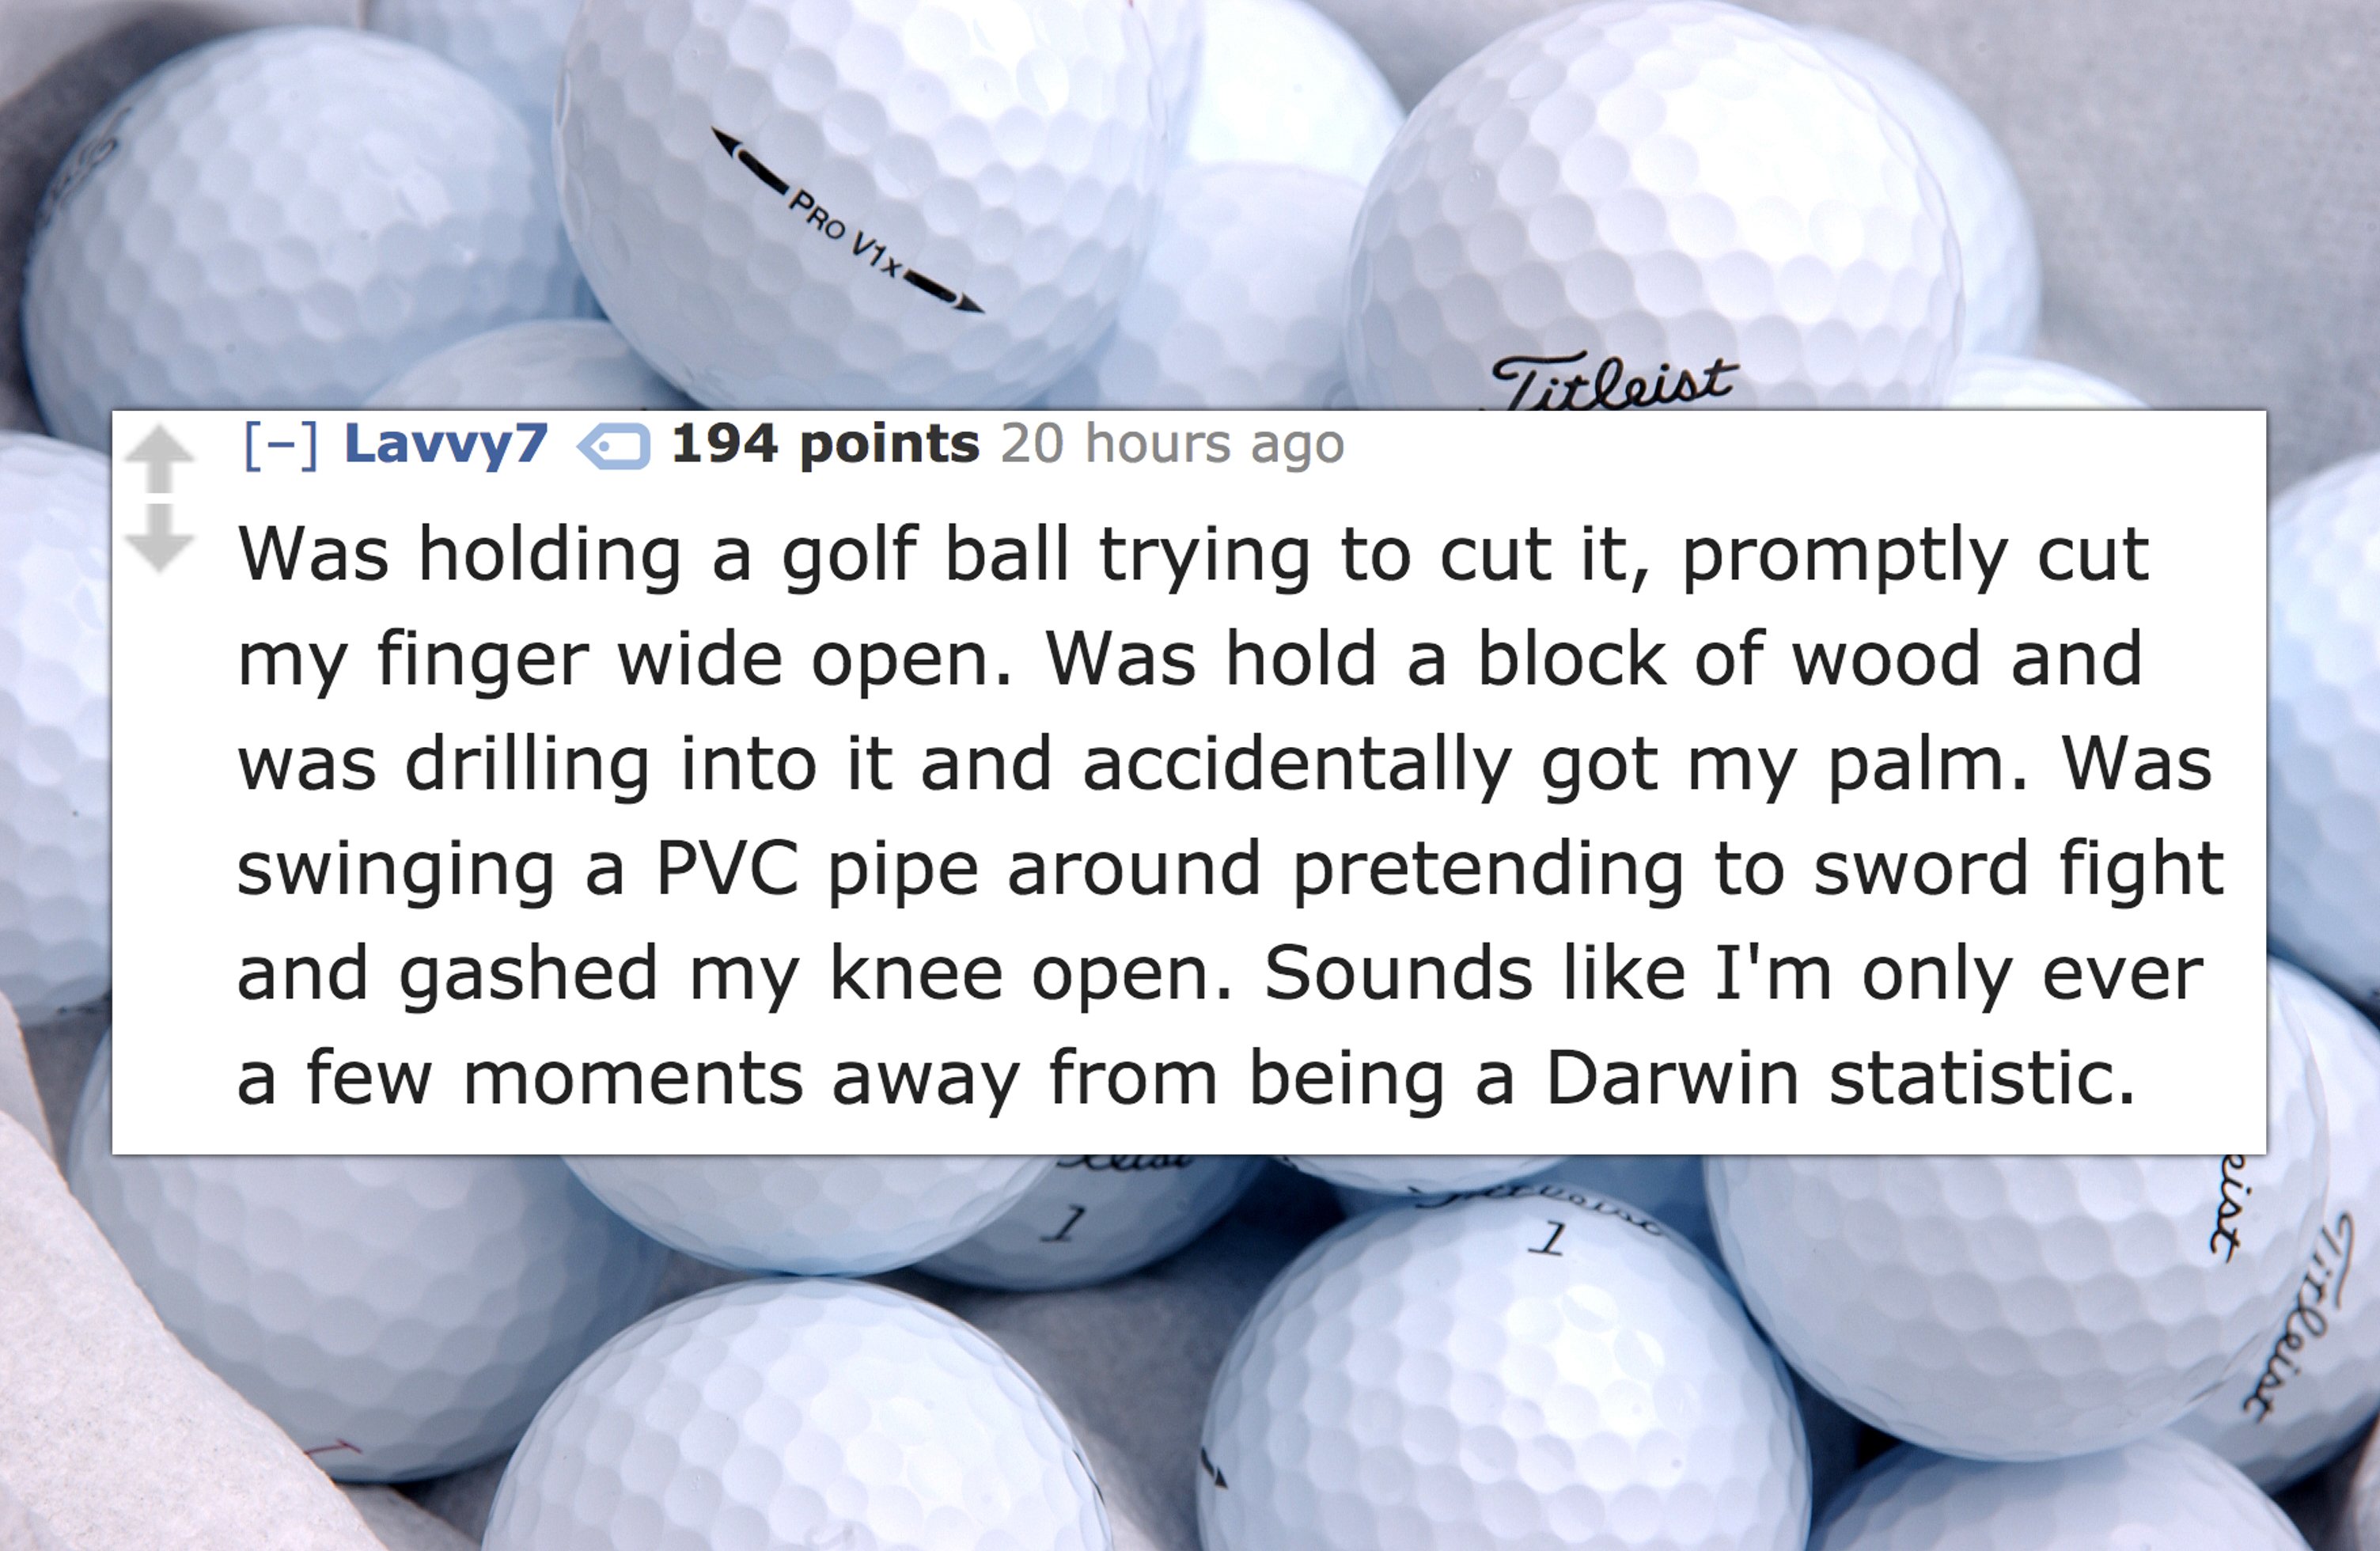 golf brands - Titleist Lavvy7 194 points 20 hours ago Was holding a golf ball trying to cut it, promptly cut my finger wide open. Was hold a block of wood and was drilling into it and accidentally got my palm. Was swinging a Pvc pipe around pretending to 